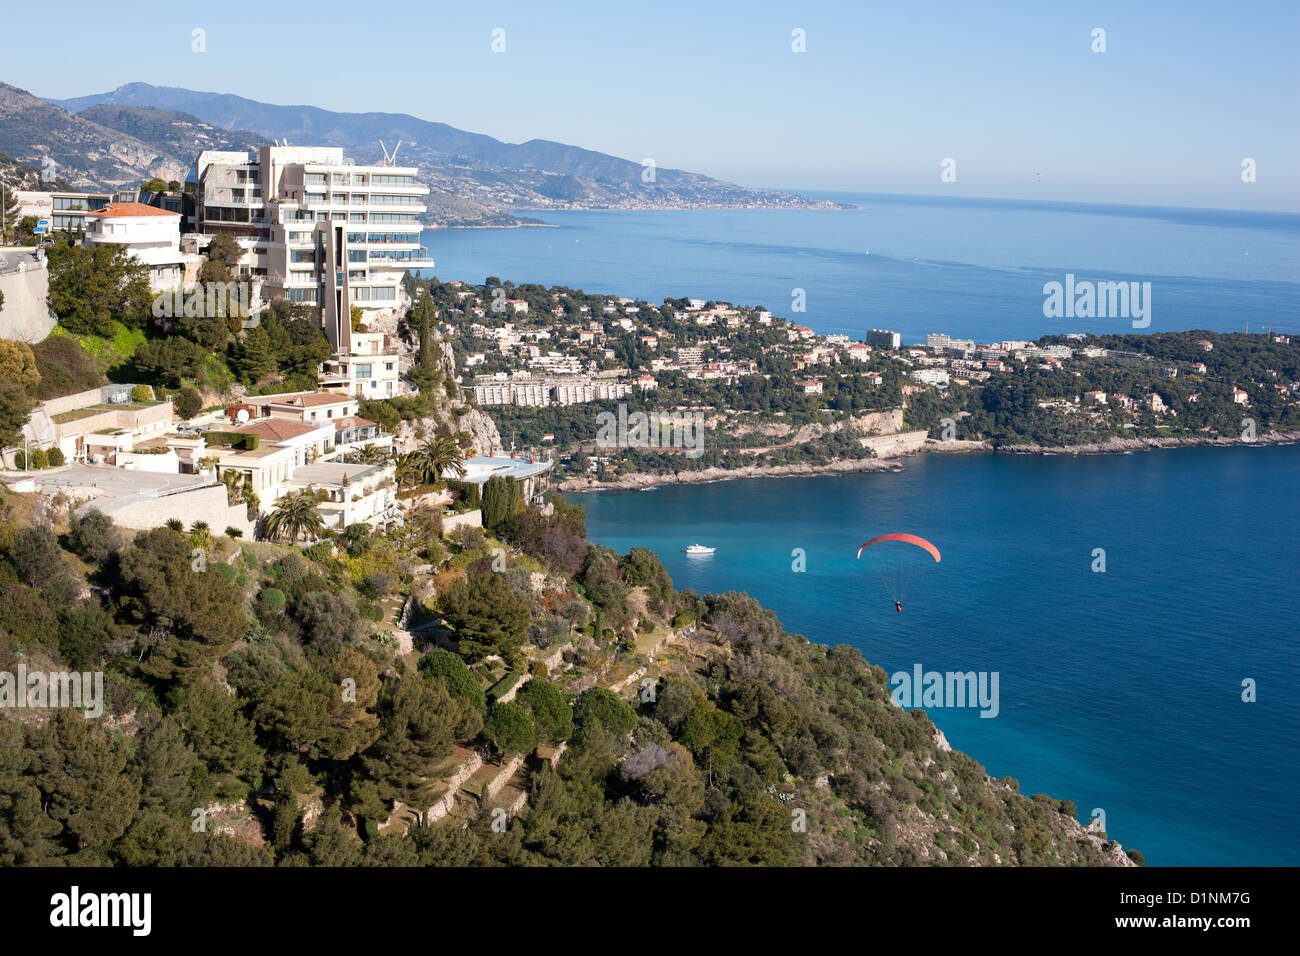 AERIAL VIEW. Vista Palace Hotel with its stunning views of the Mediterranean Sea. Roquebrune-Cap-Martin, French Riviera, France. Stock Photo